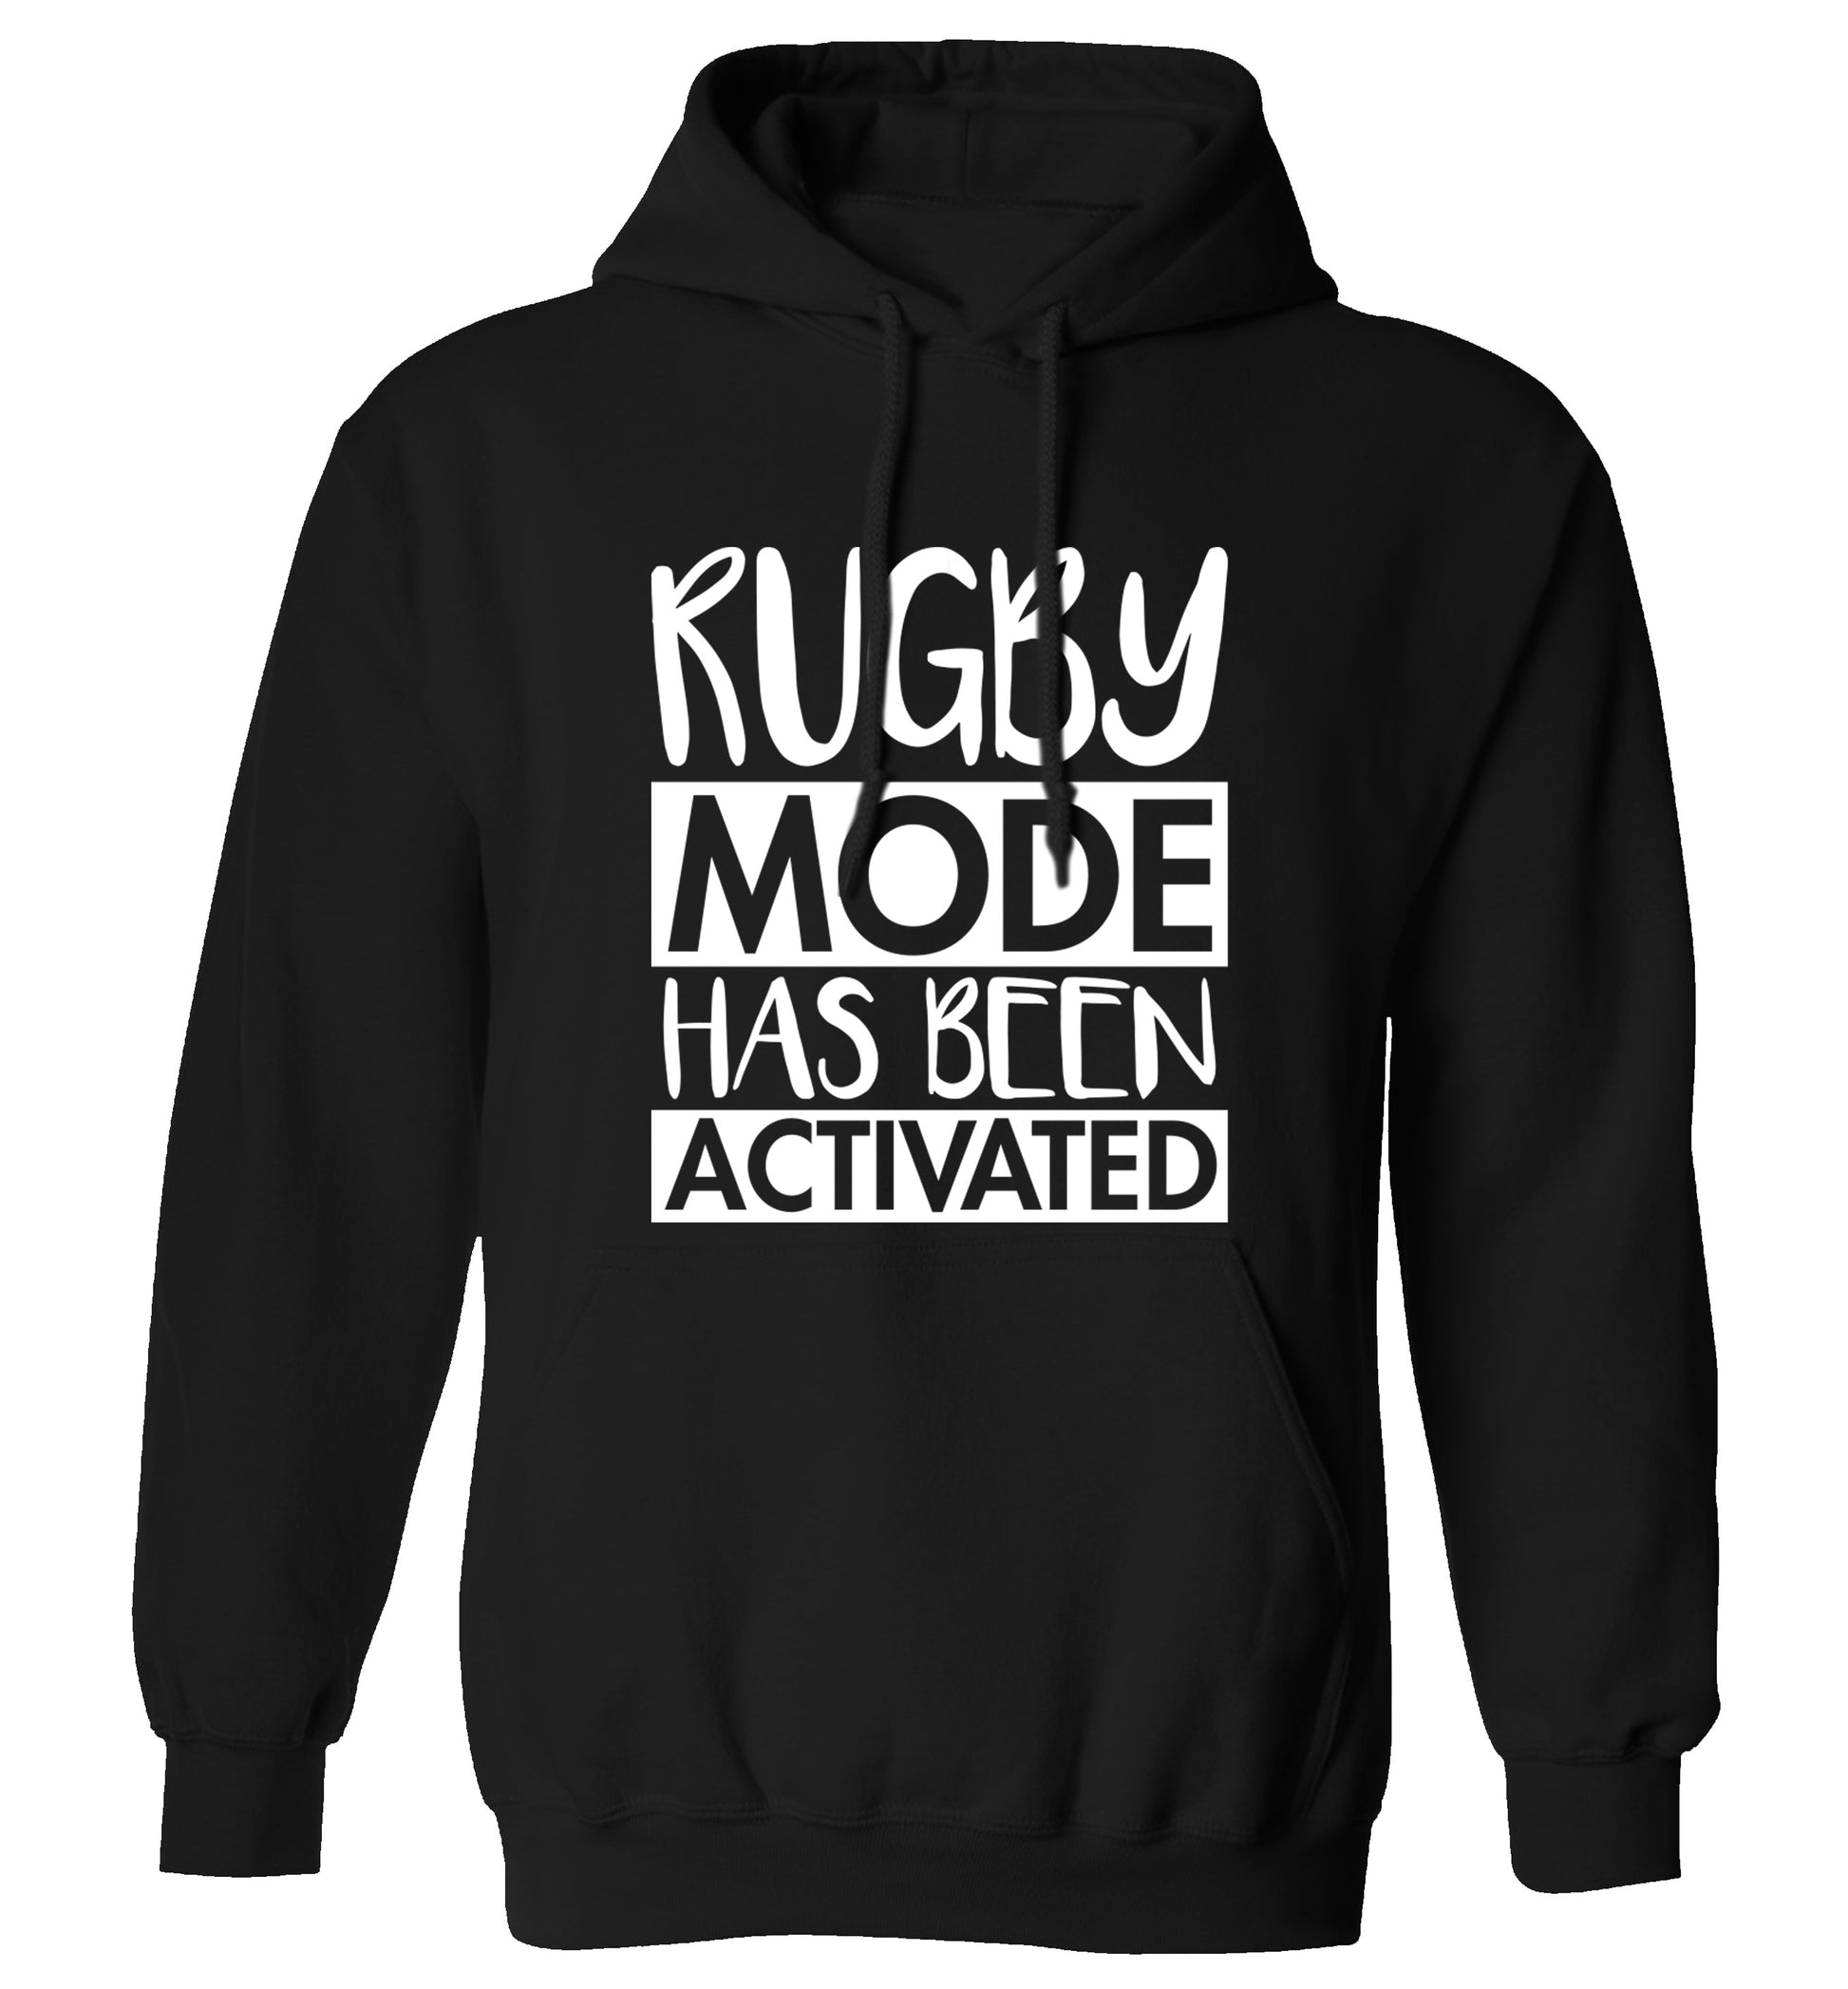 Rugby mode activated adults unisex black hoodie 2XL